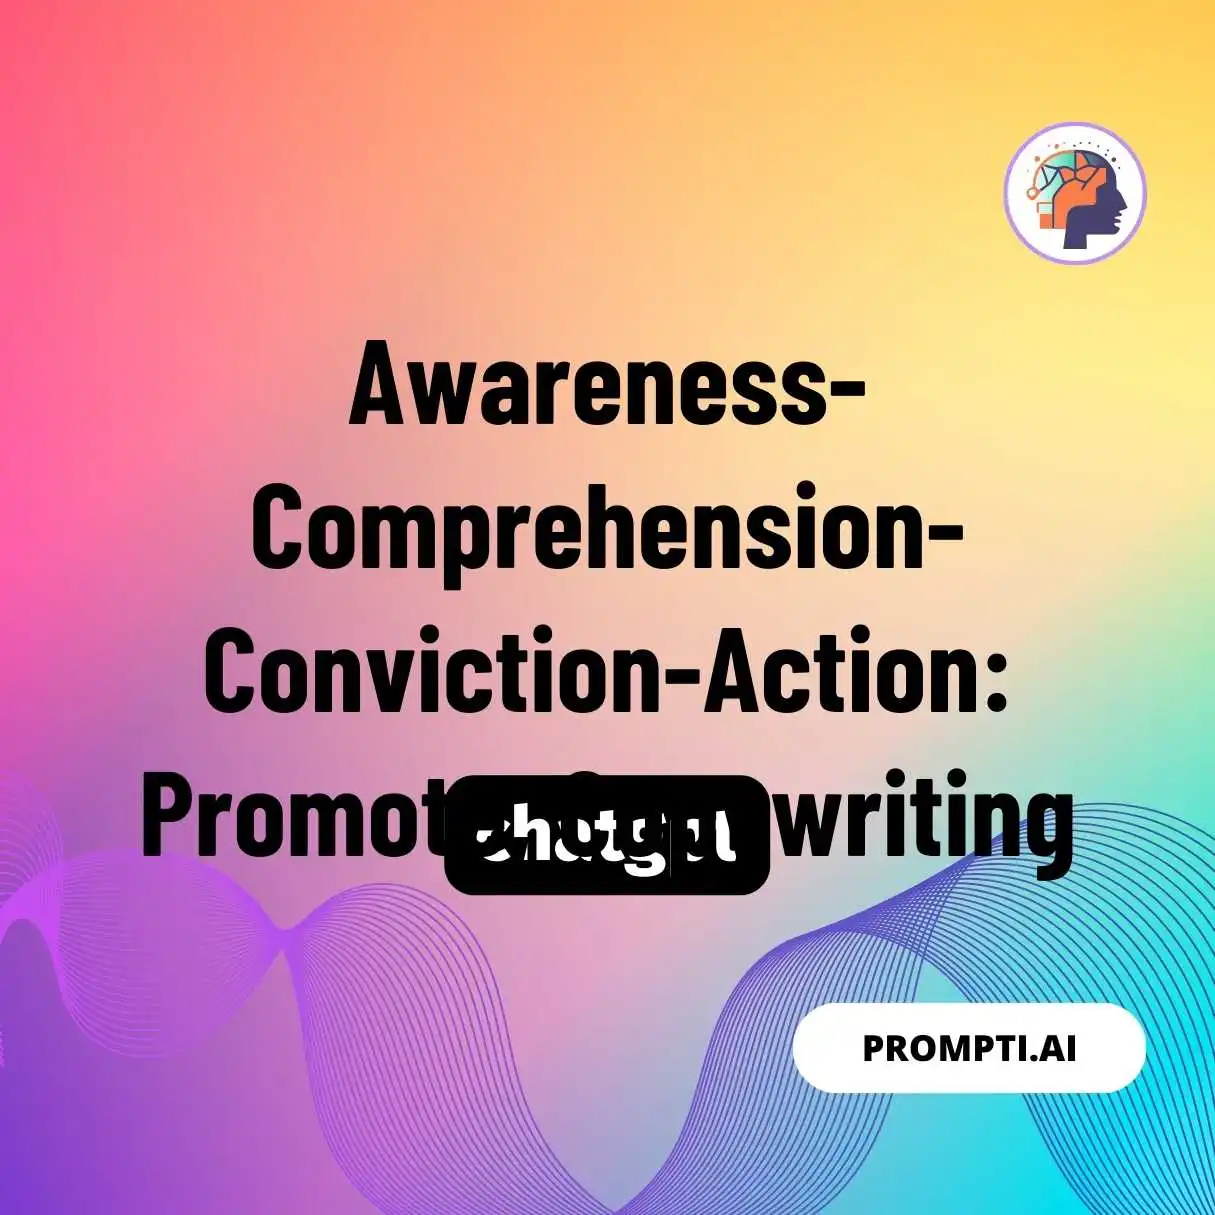 Awareness-Comprehension-Conviction-Action: Promote, Copywriting